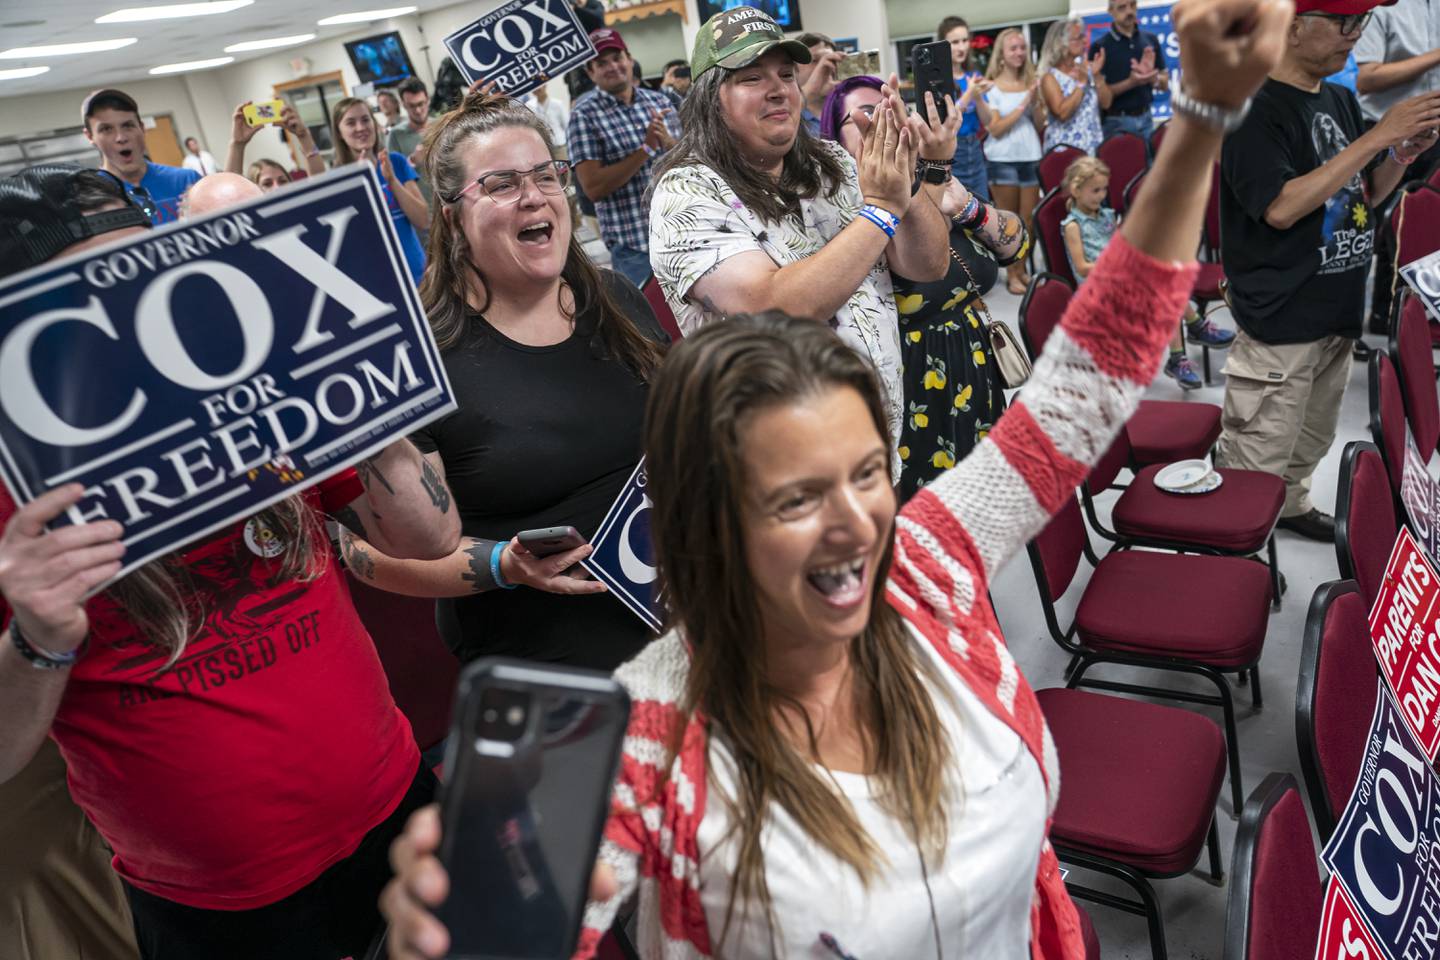 Supporters celebrate as Dan Cox, a candidate for the Republican gubernatorial nomination, announces his primary win on July 19, 2022 in Emmitsburg, Maryland. Voters will choose candidates during the primary for governor and seats in the House of Representatives in the upcoming November election.